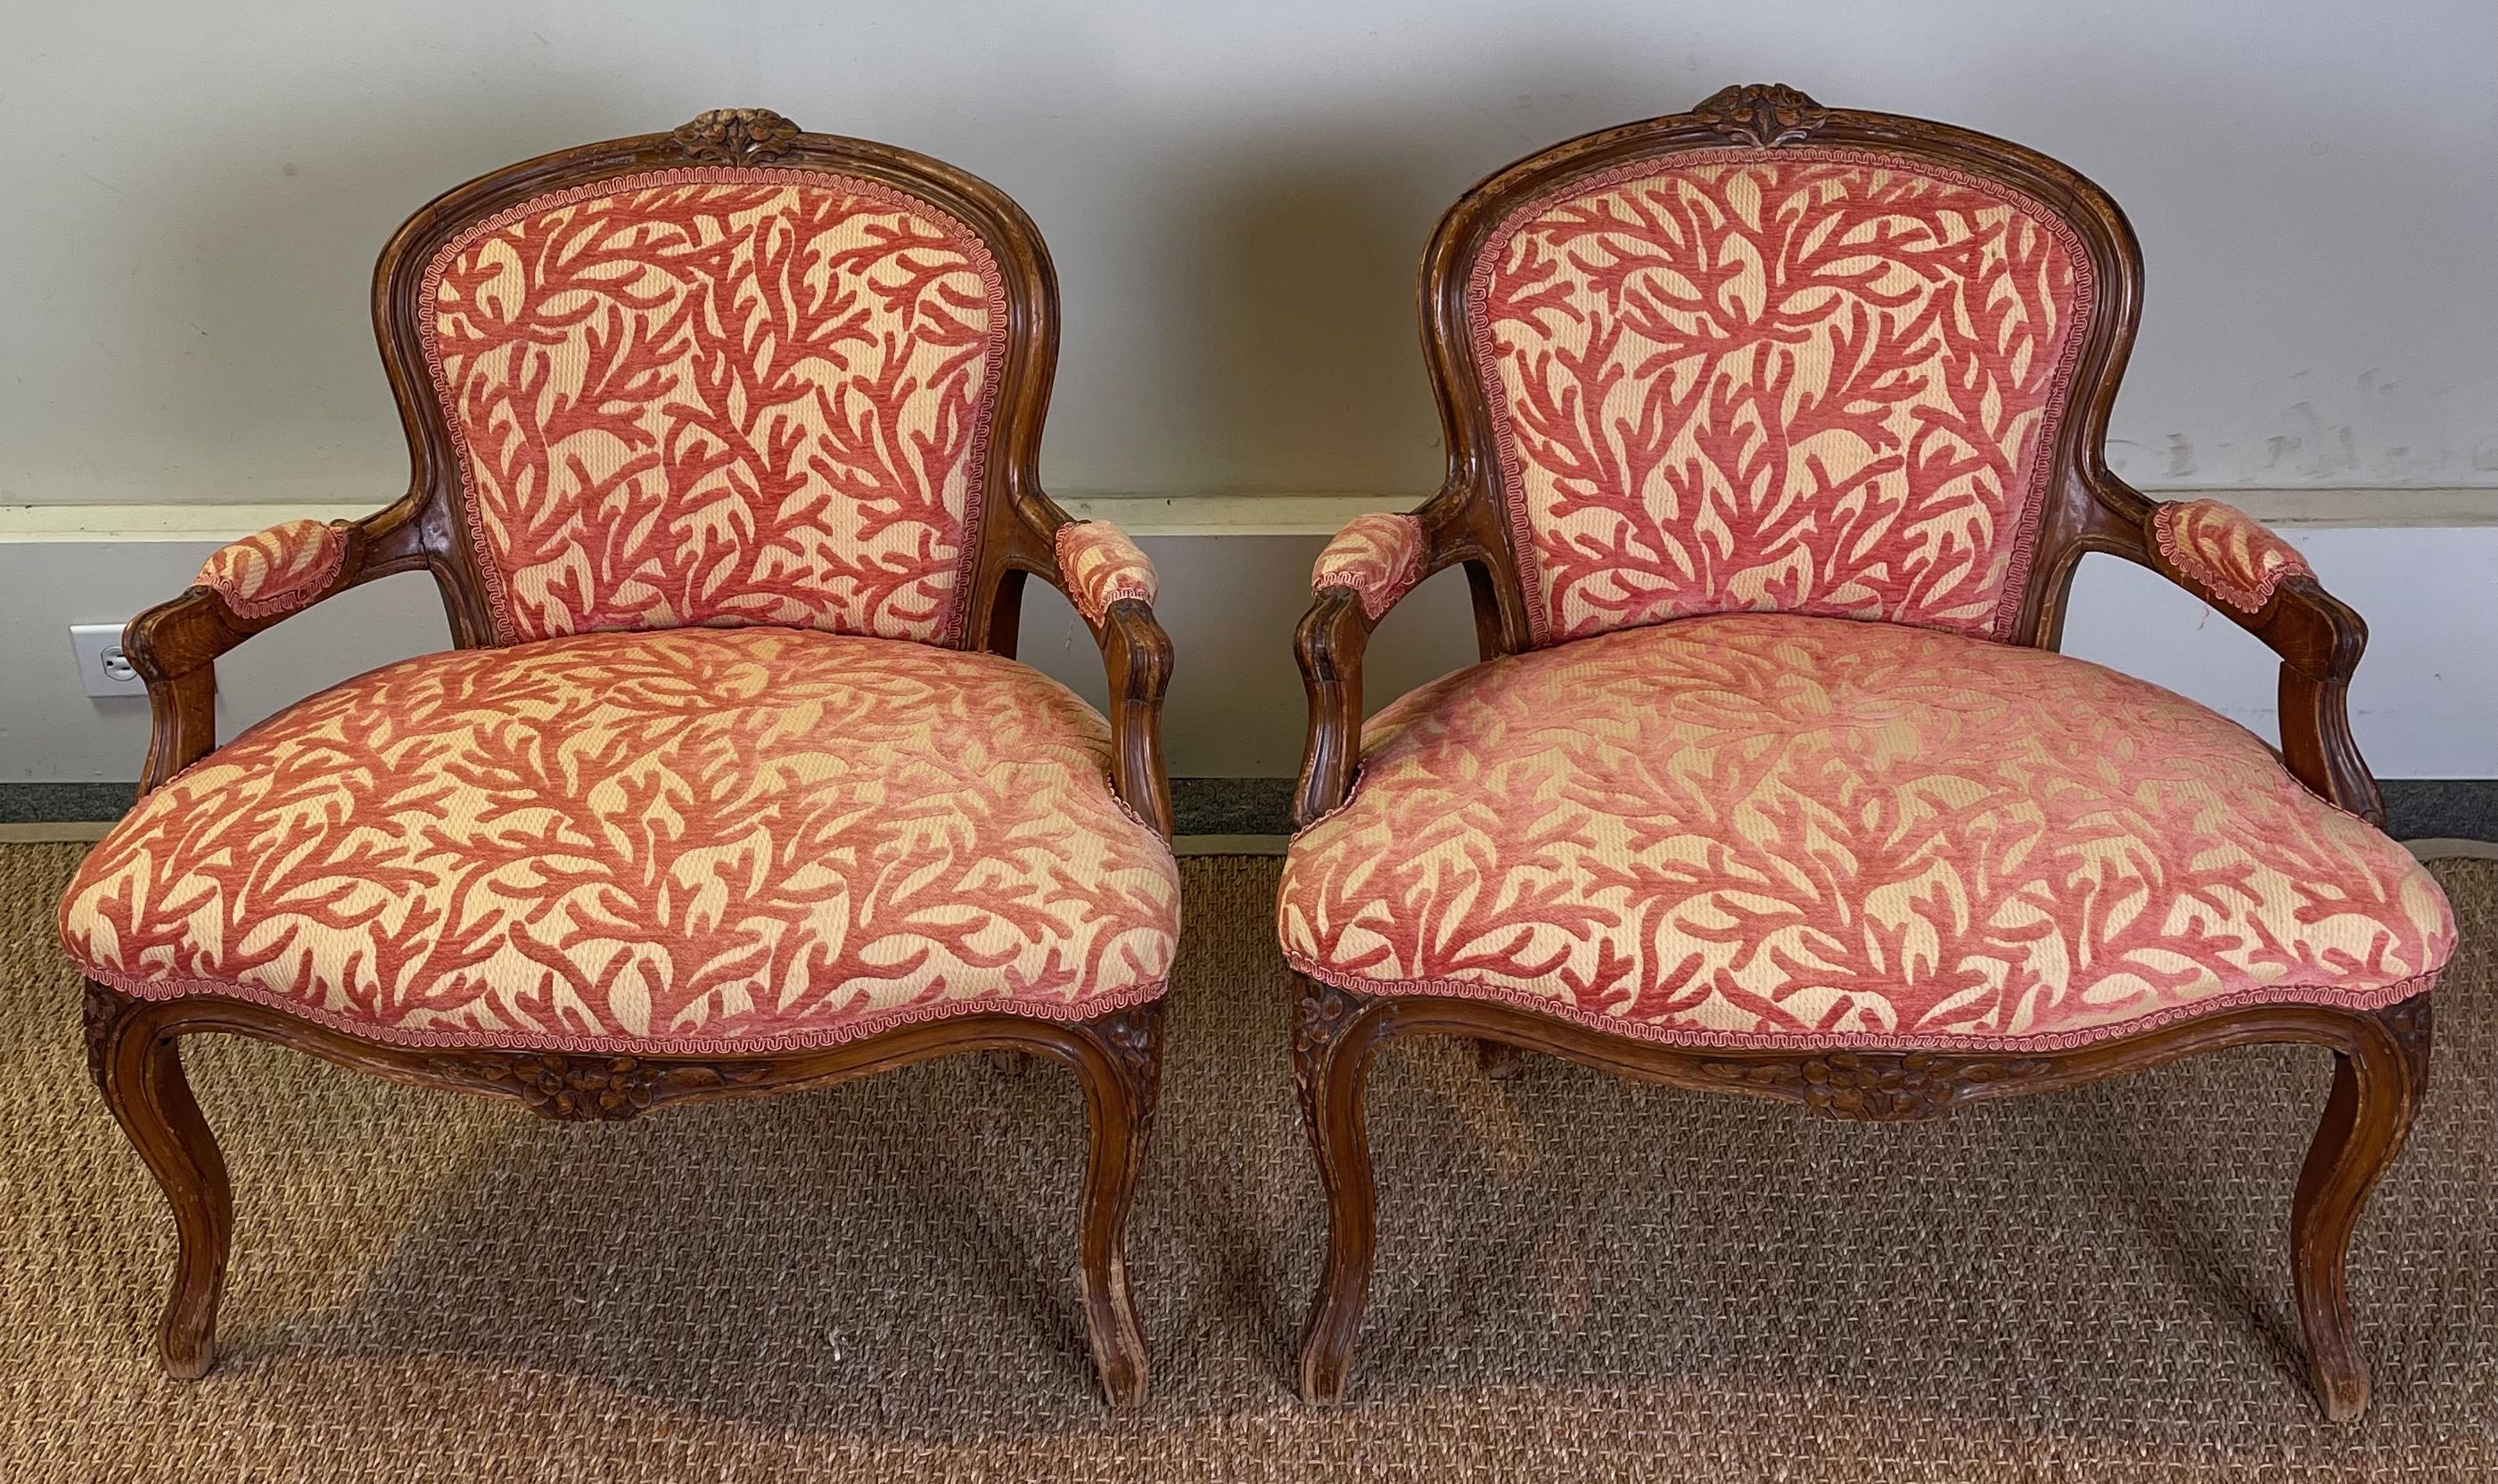 An unusual pair of early 20th C. carved walnut arm chairs or fauteuils with wide, low slung seats perhaps designed to capture the warmth of a fire covered in a coral branch velvet upholstery.